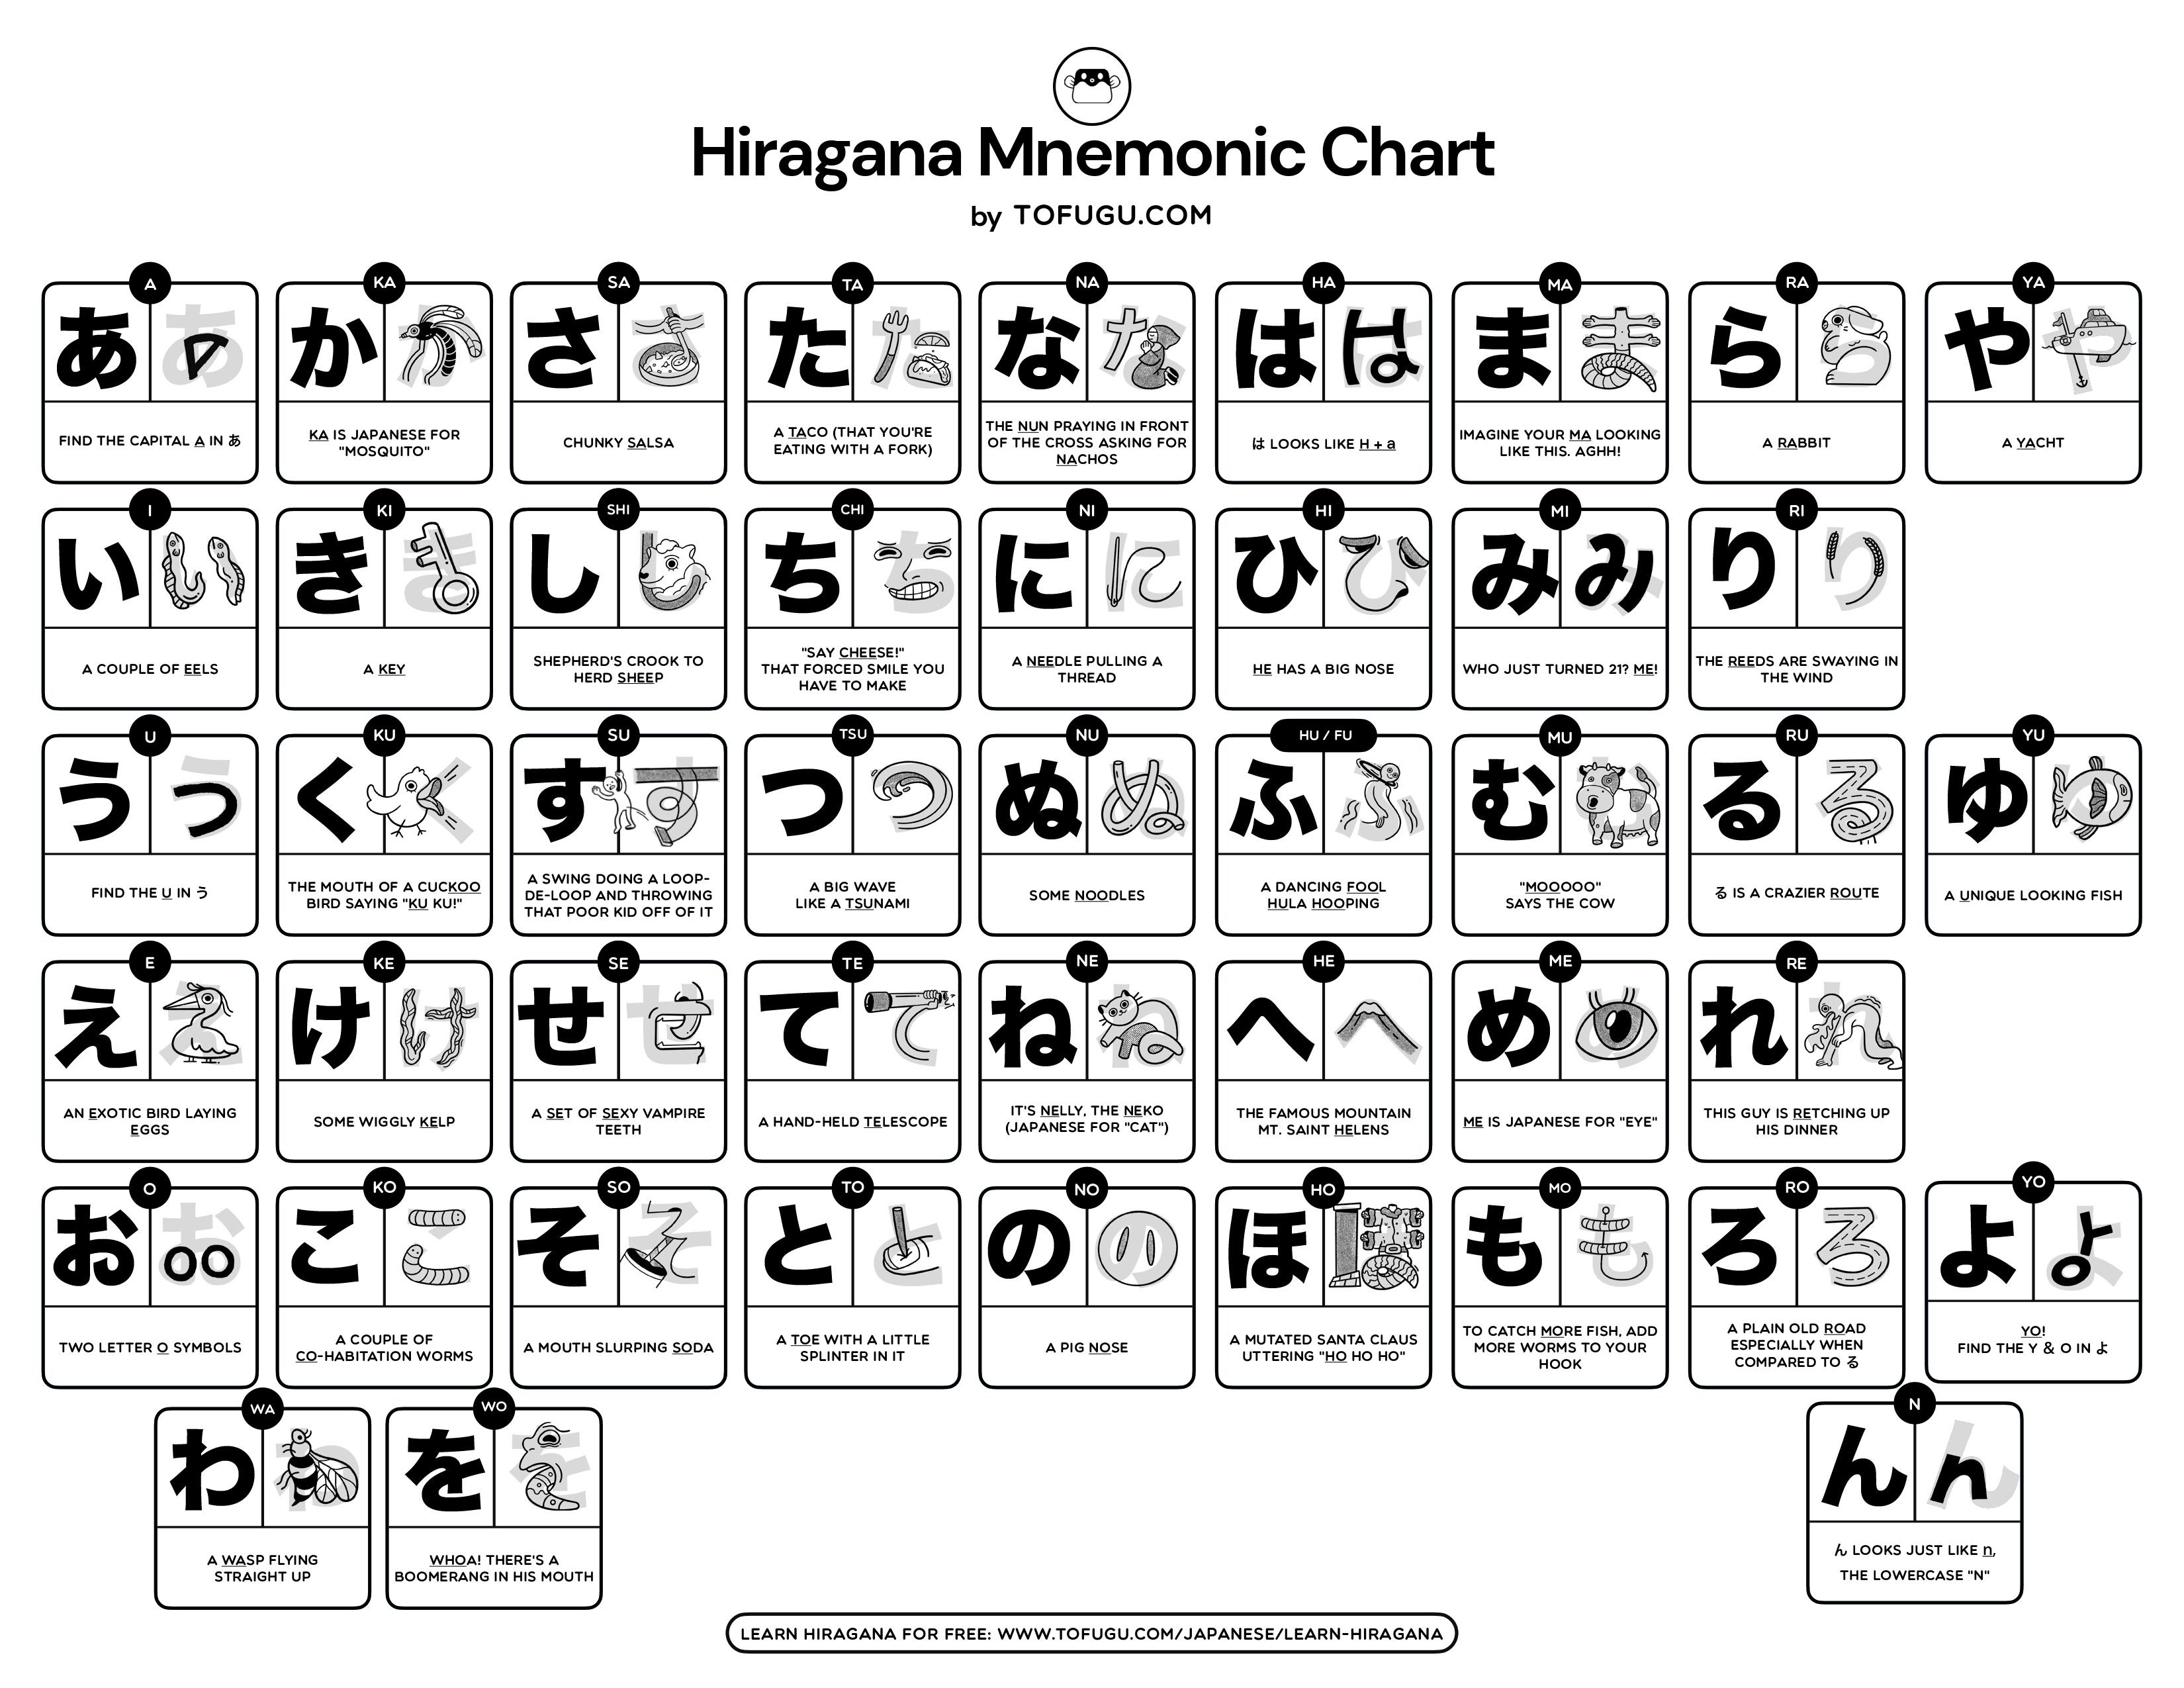 How to Quickly and Effectively Learn Hiragana